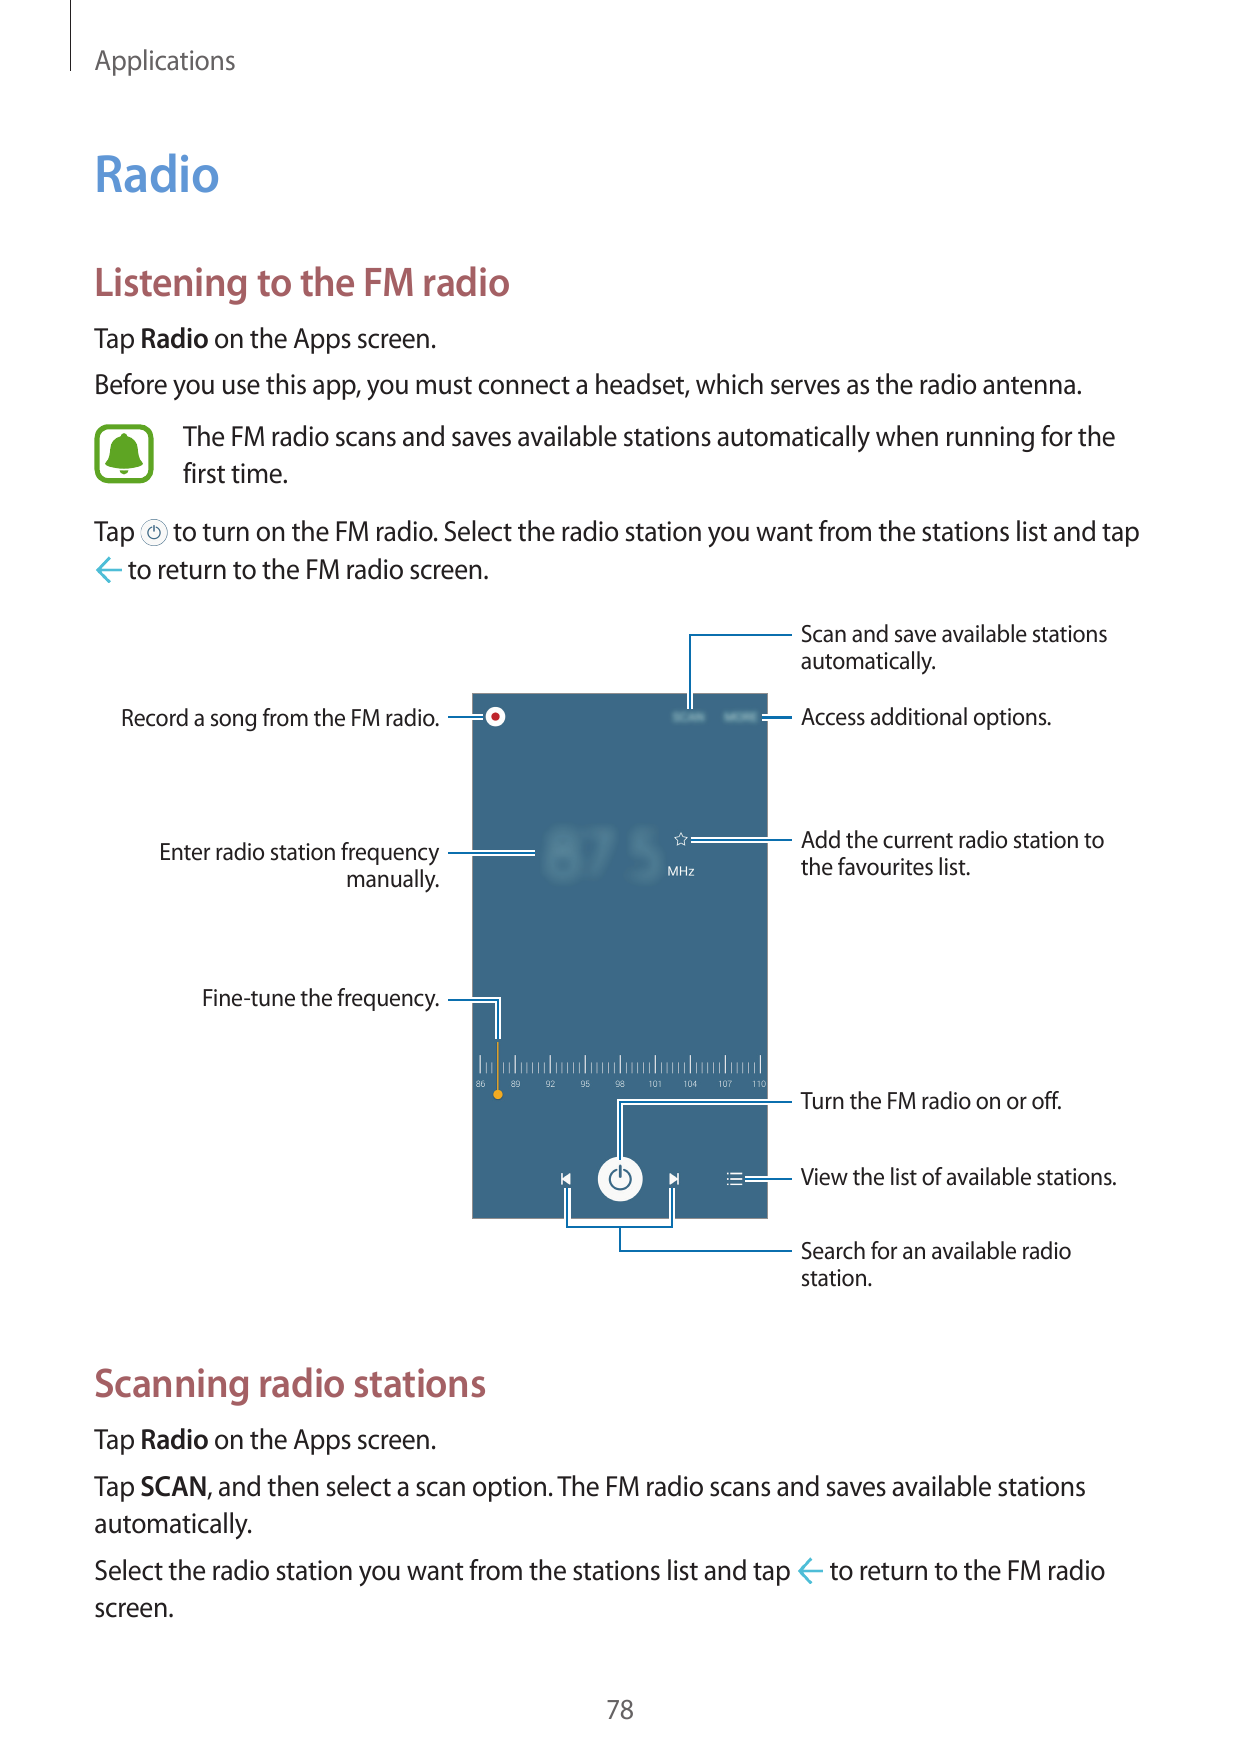 ApplicationsRadioListening to the FM radioTap Radio on the Apps screen.Before you use this app, you must connect a headset, whic